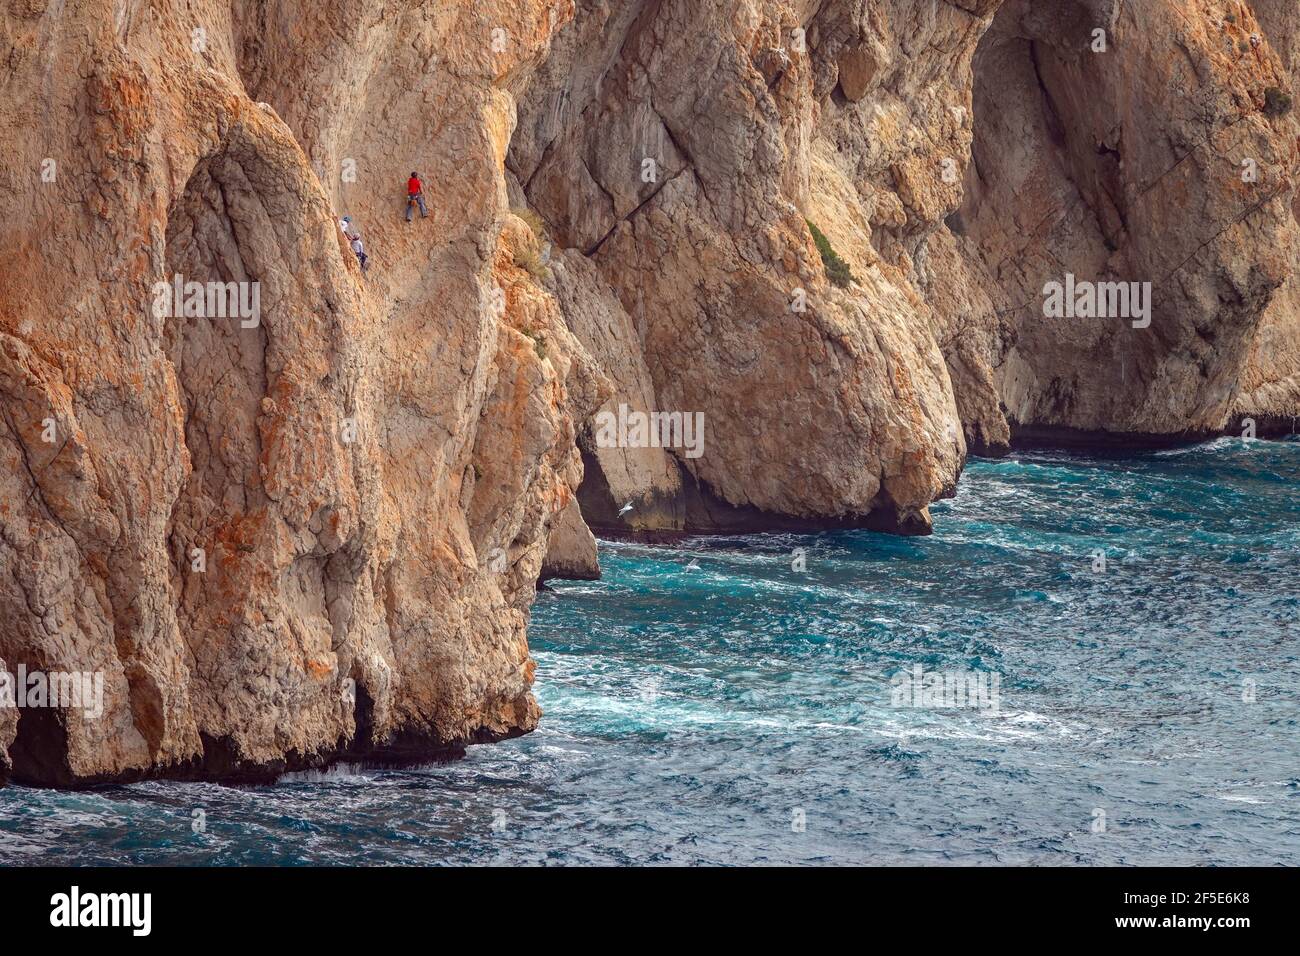 Tiny rock climbers on the huge red seacliffs of Toix at Calpe, Costa Blanca, Spain Stock Photo